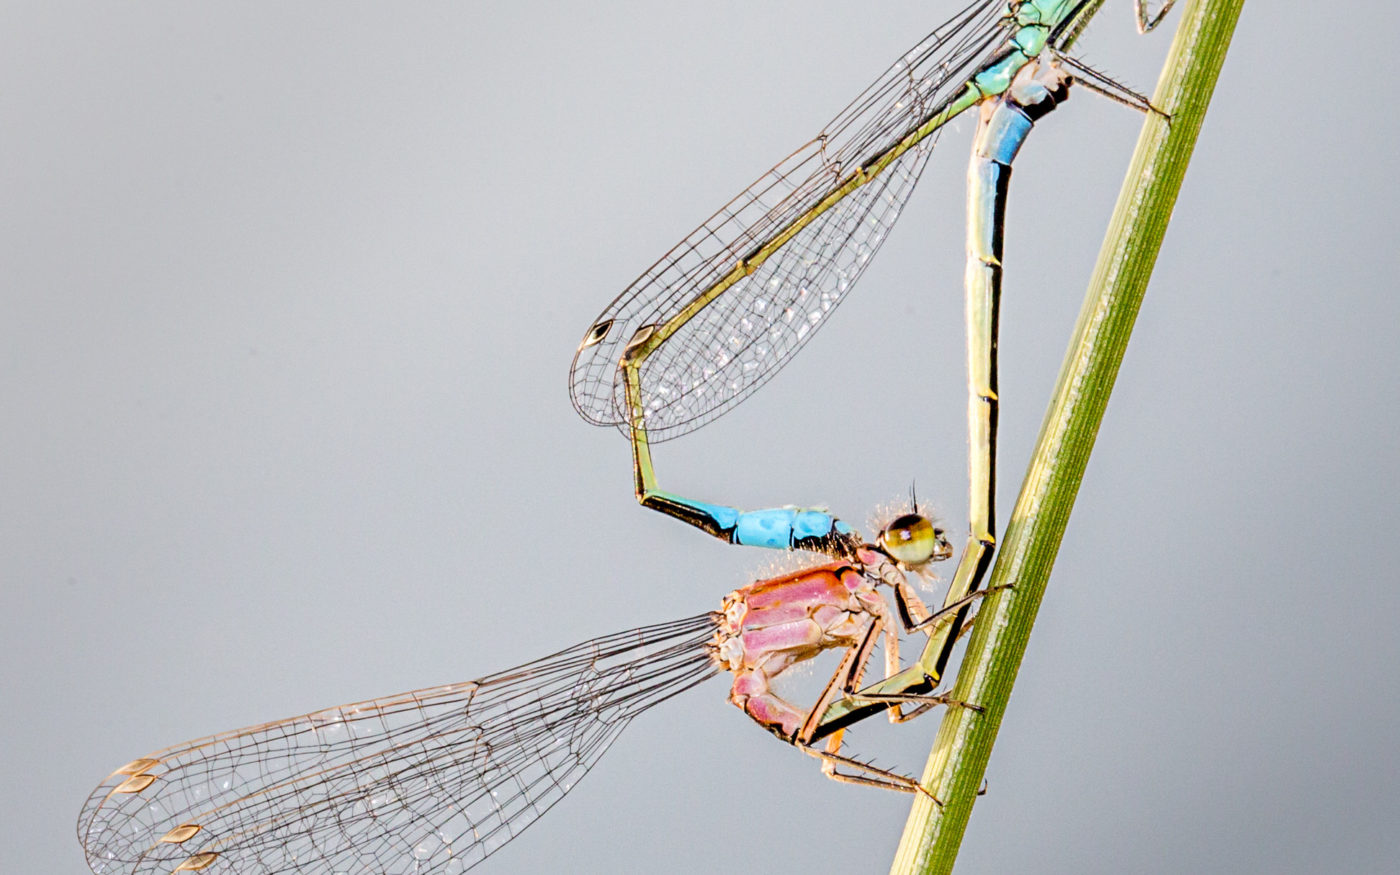 The blue-tailed damselfly, Ischnura elegans, has five different female colour forms. The female in the mating pair here is the immature rufescens form, with a salmon-pink thorax and blue tail spot.